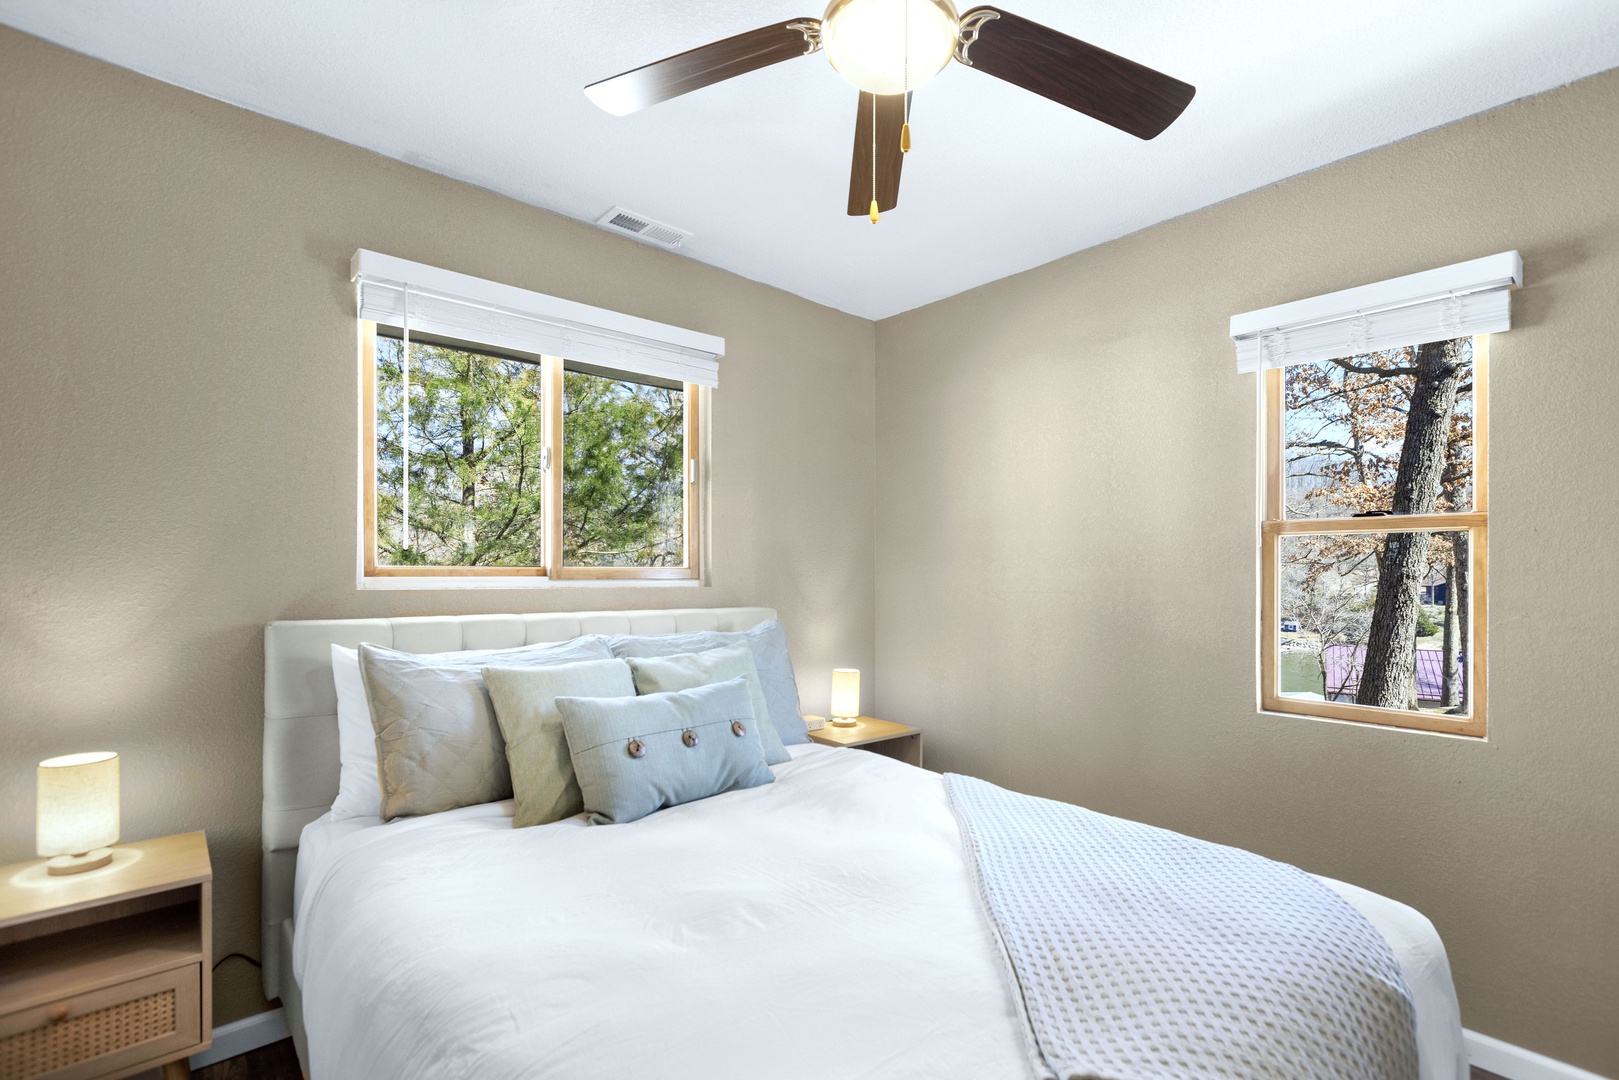 This serene bedroom includes a queen-sized bed & ceiling fan